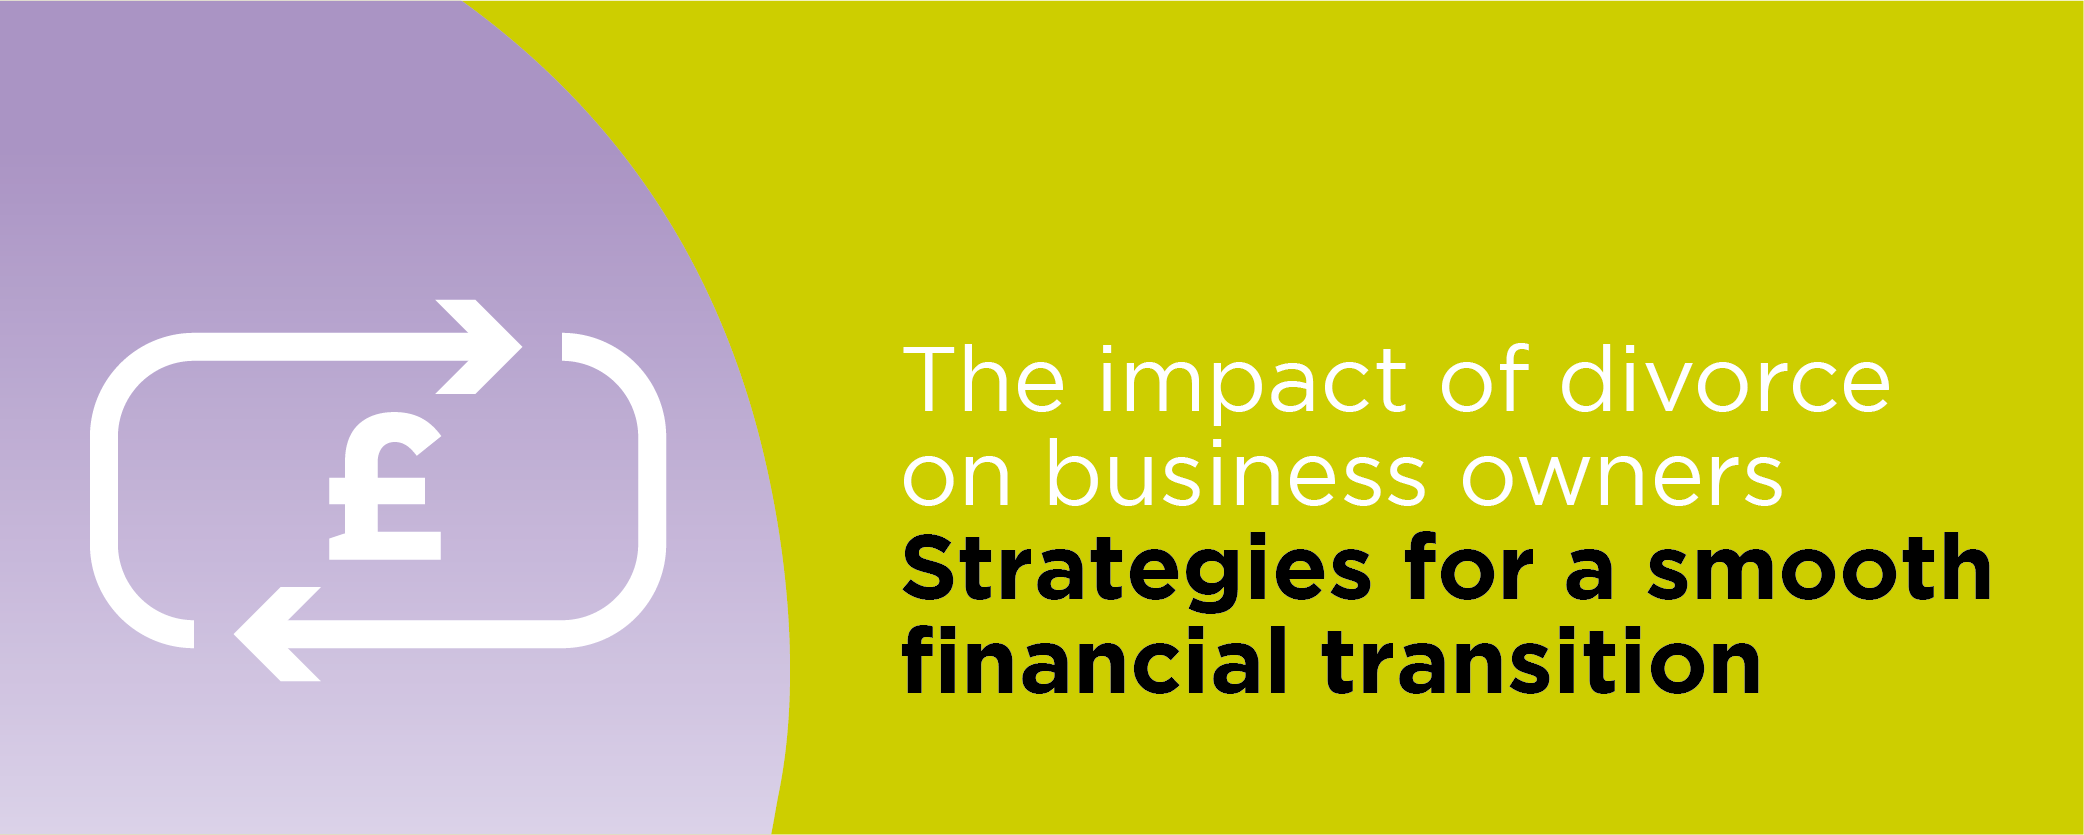 The impact of divorce on business owners: Strategies for a smooth financial transition